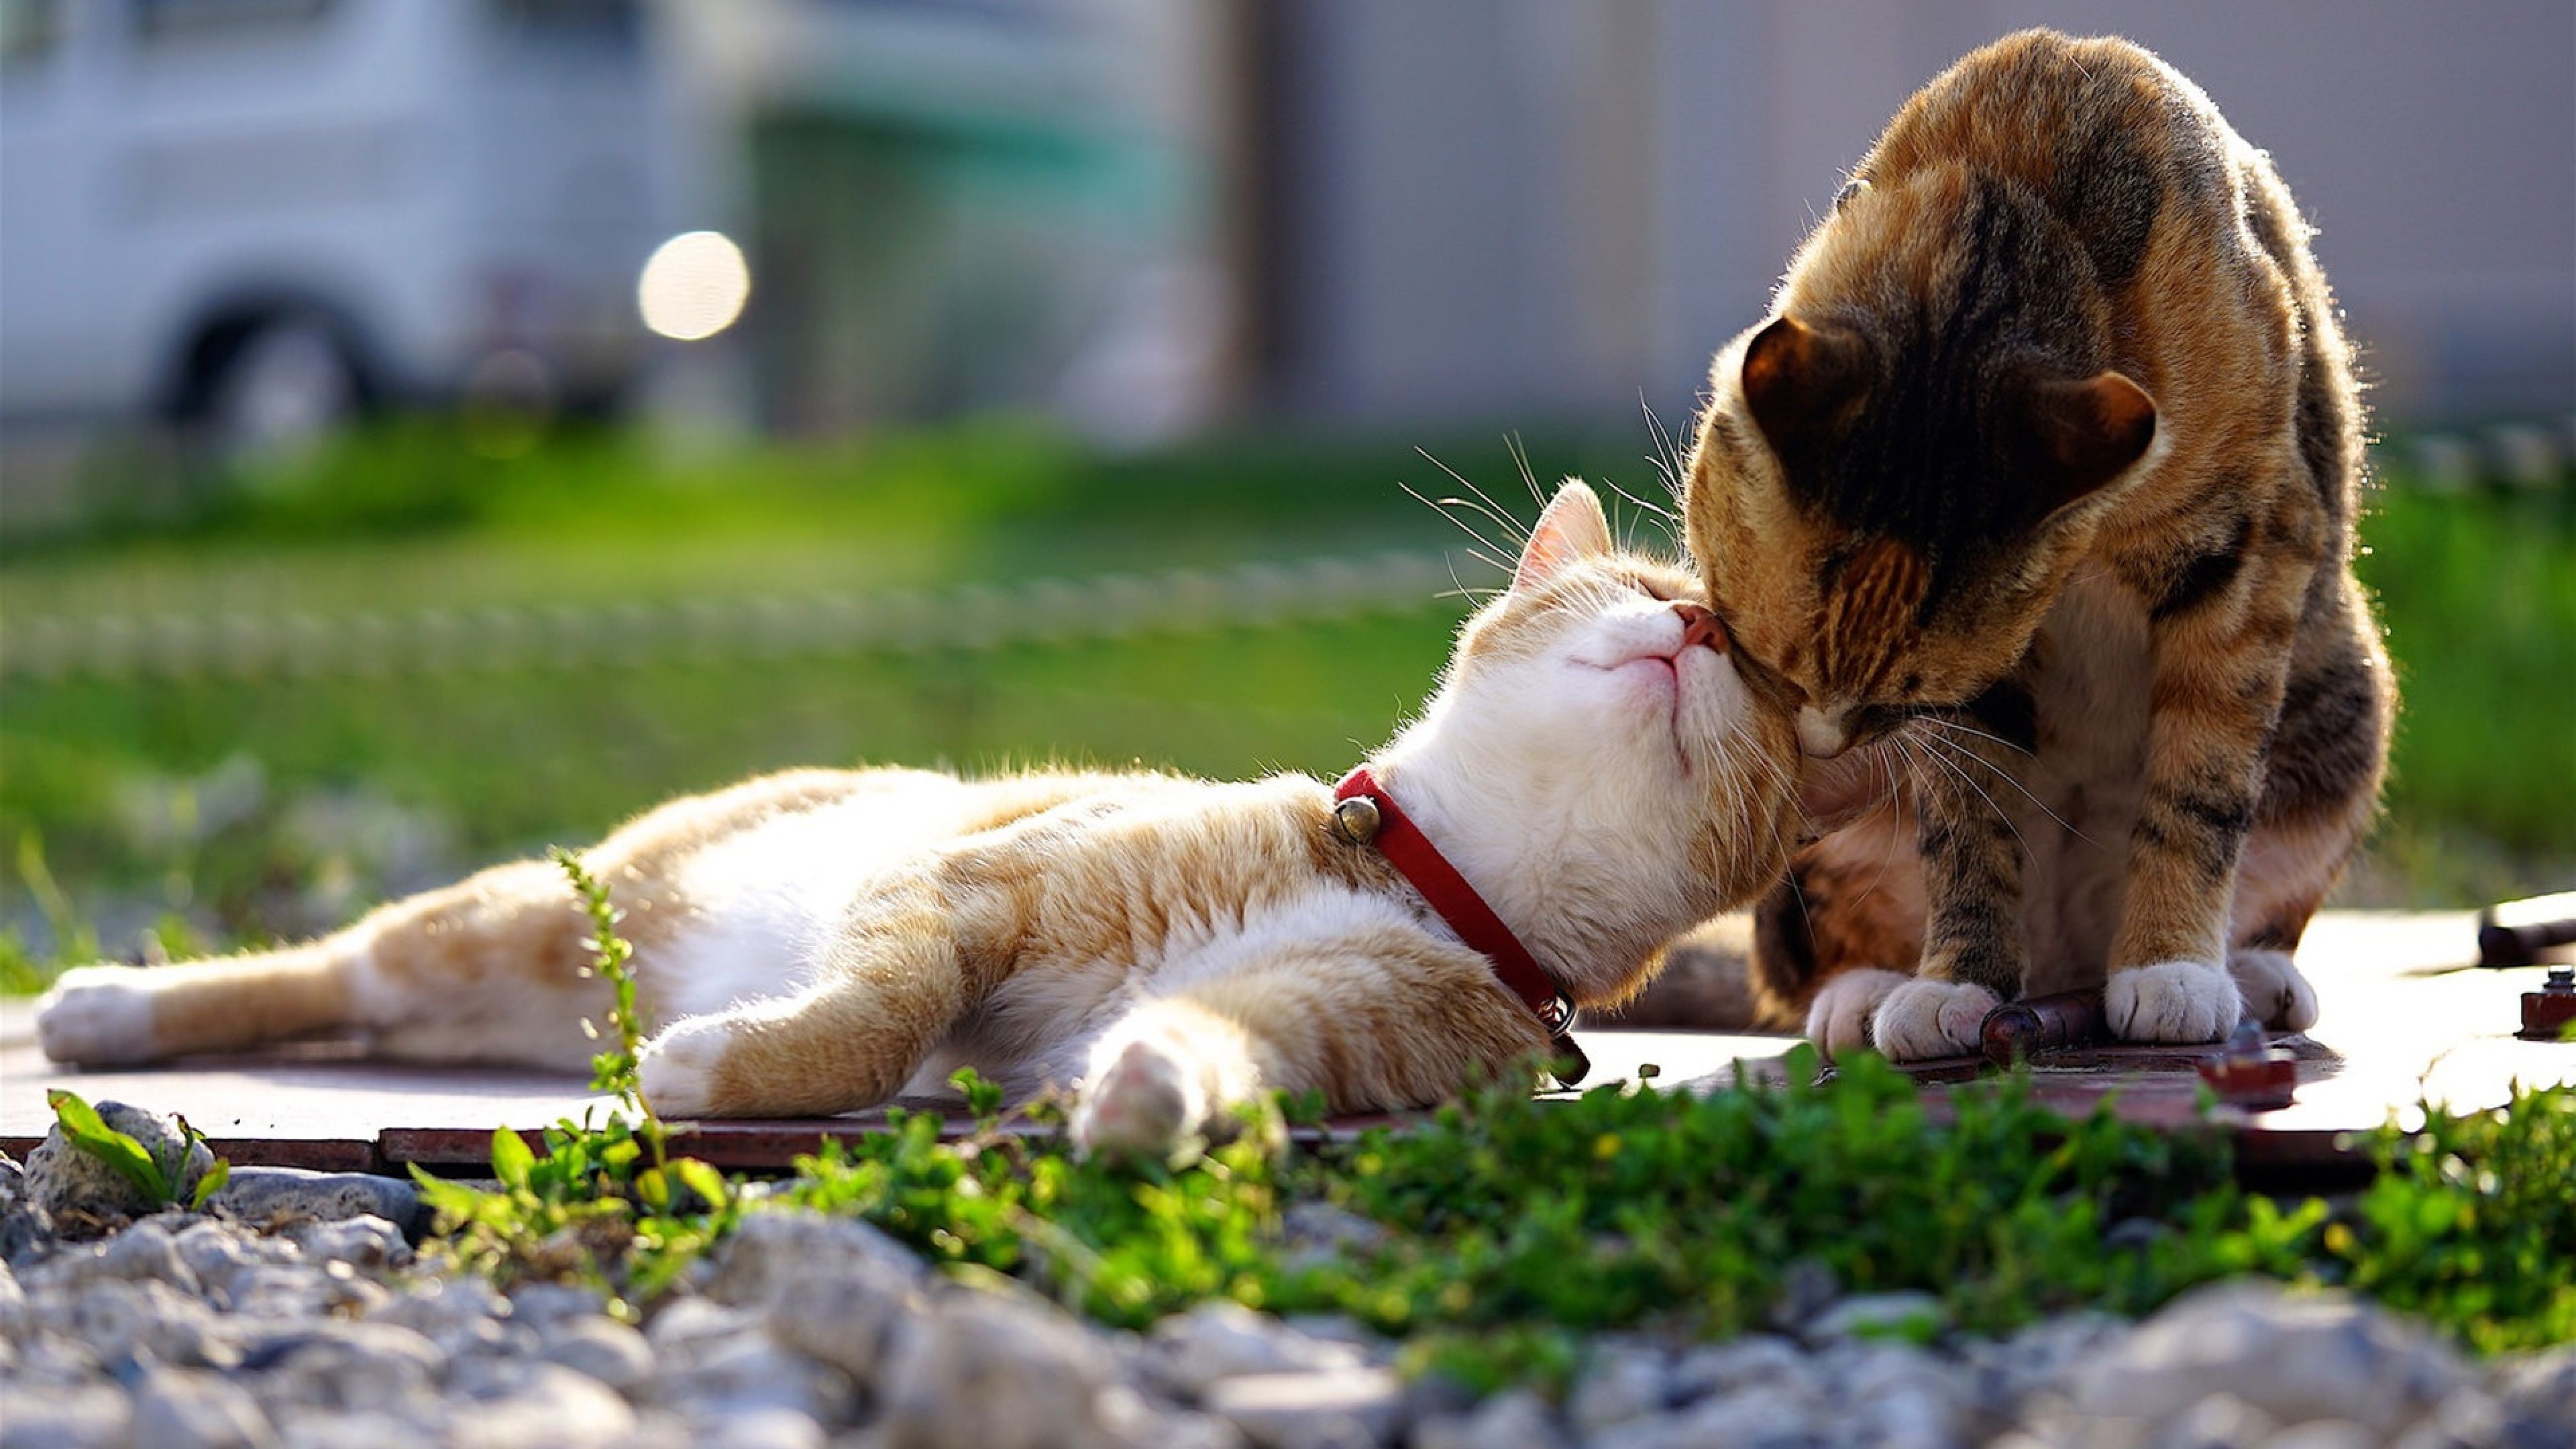 Cat and Dog Spring Wallpaper